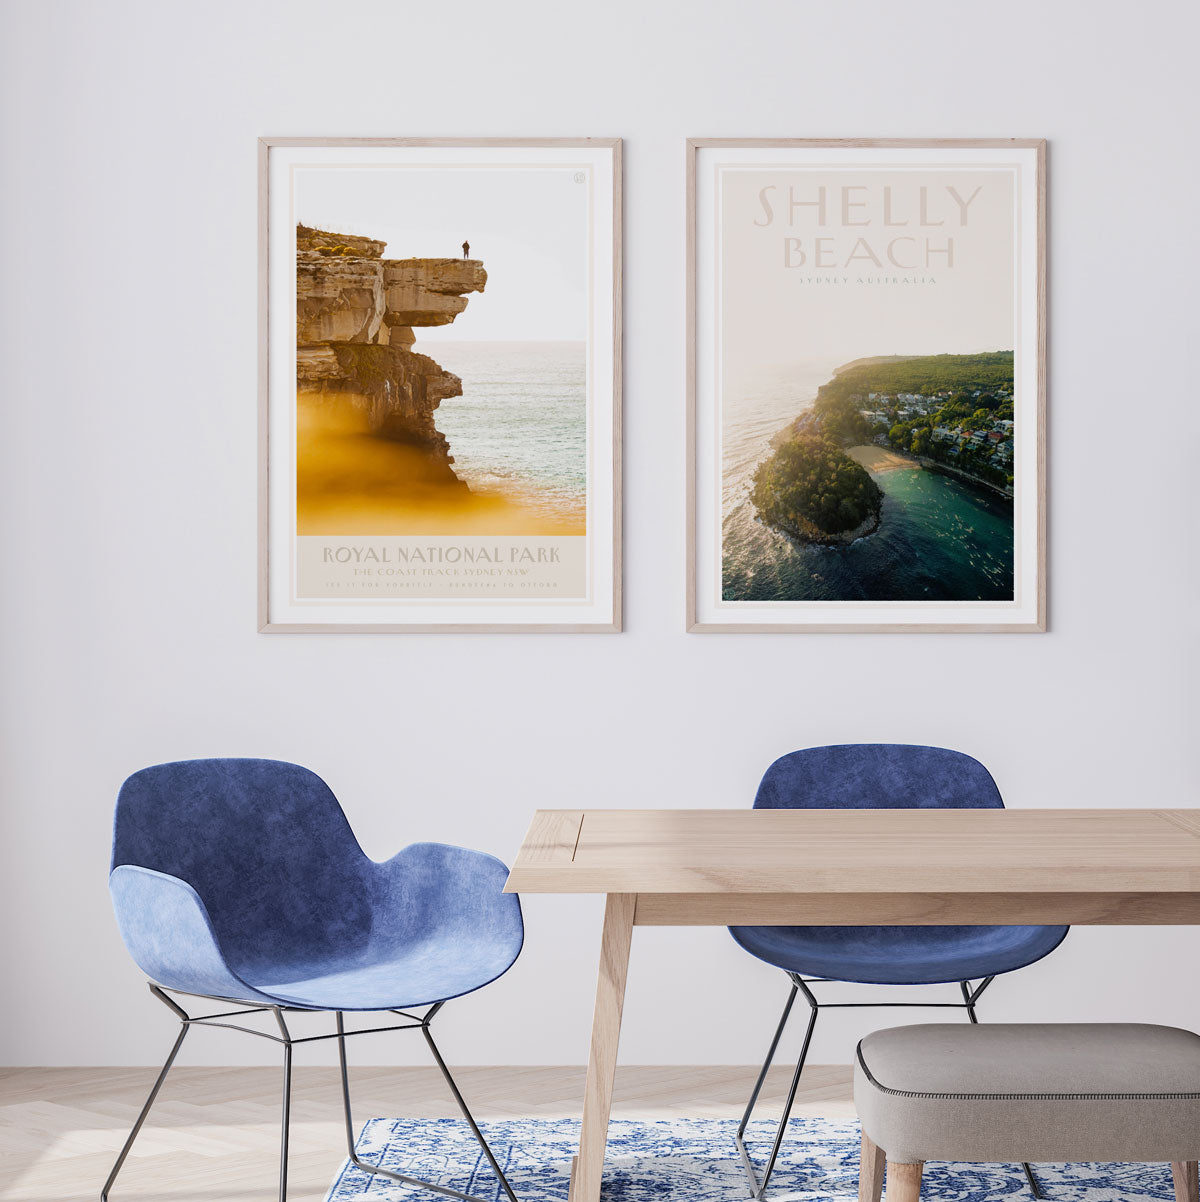 Shelly Beach travel poster by Places We Luv